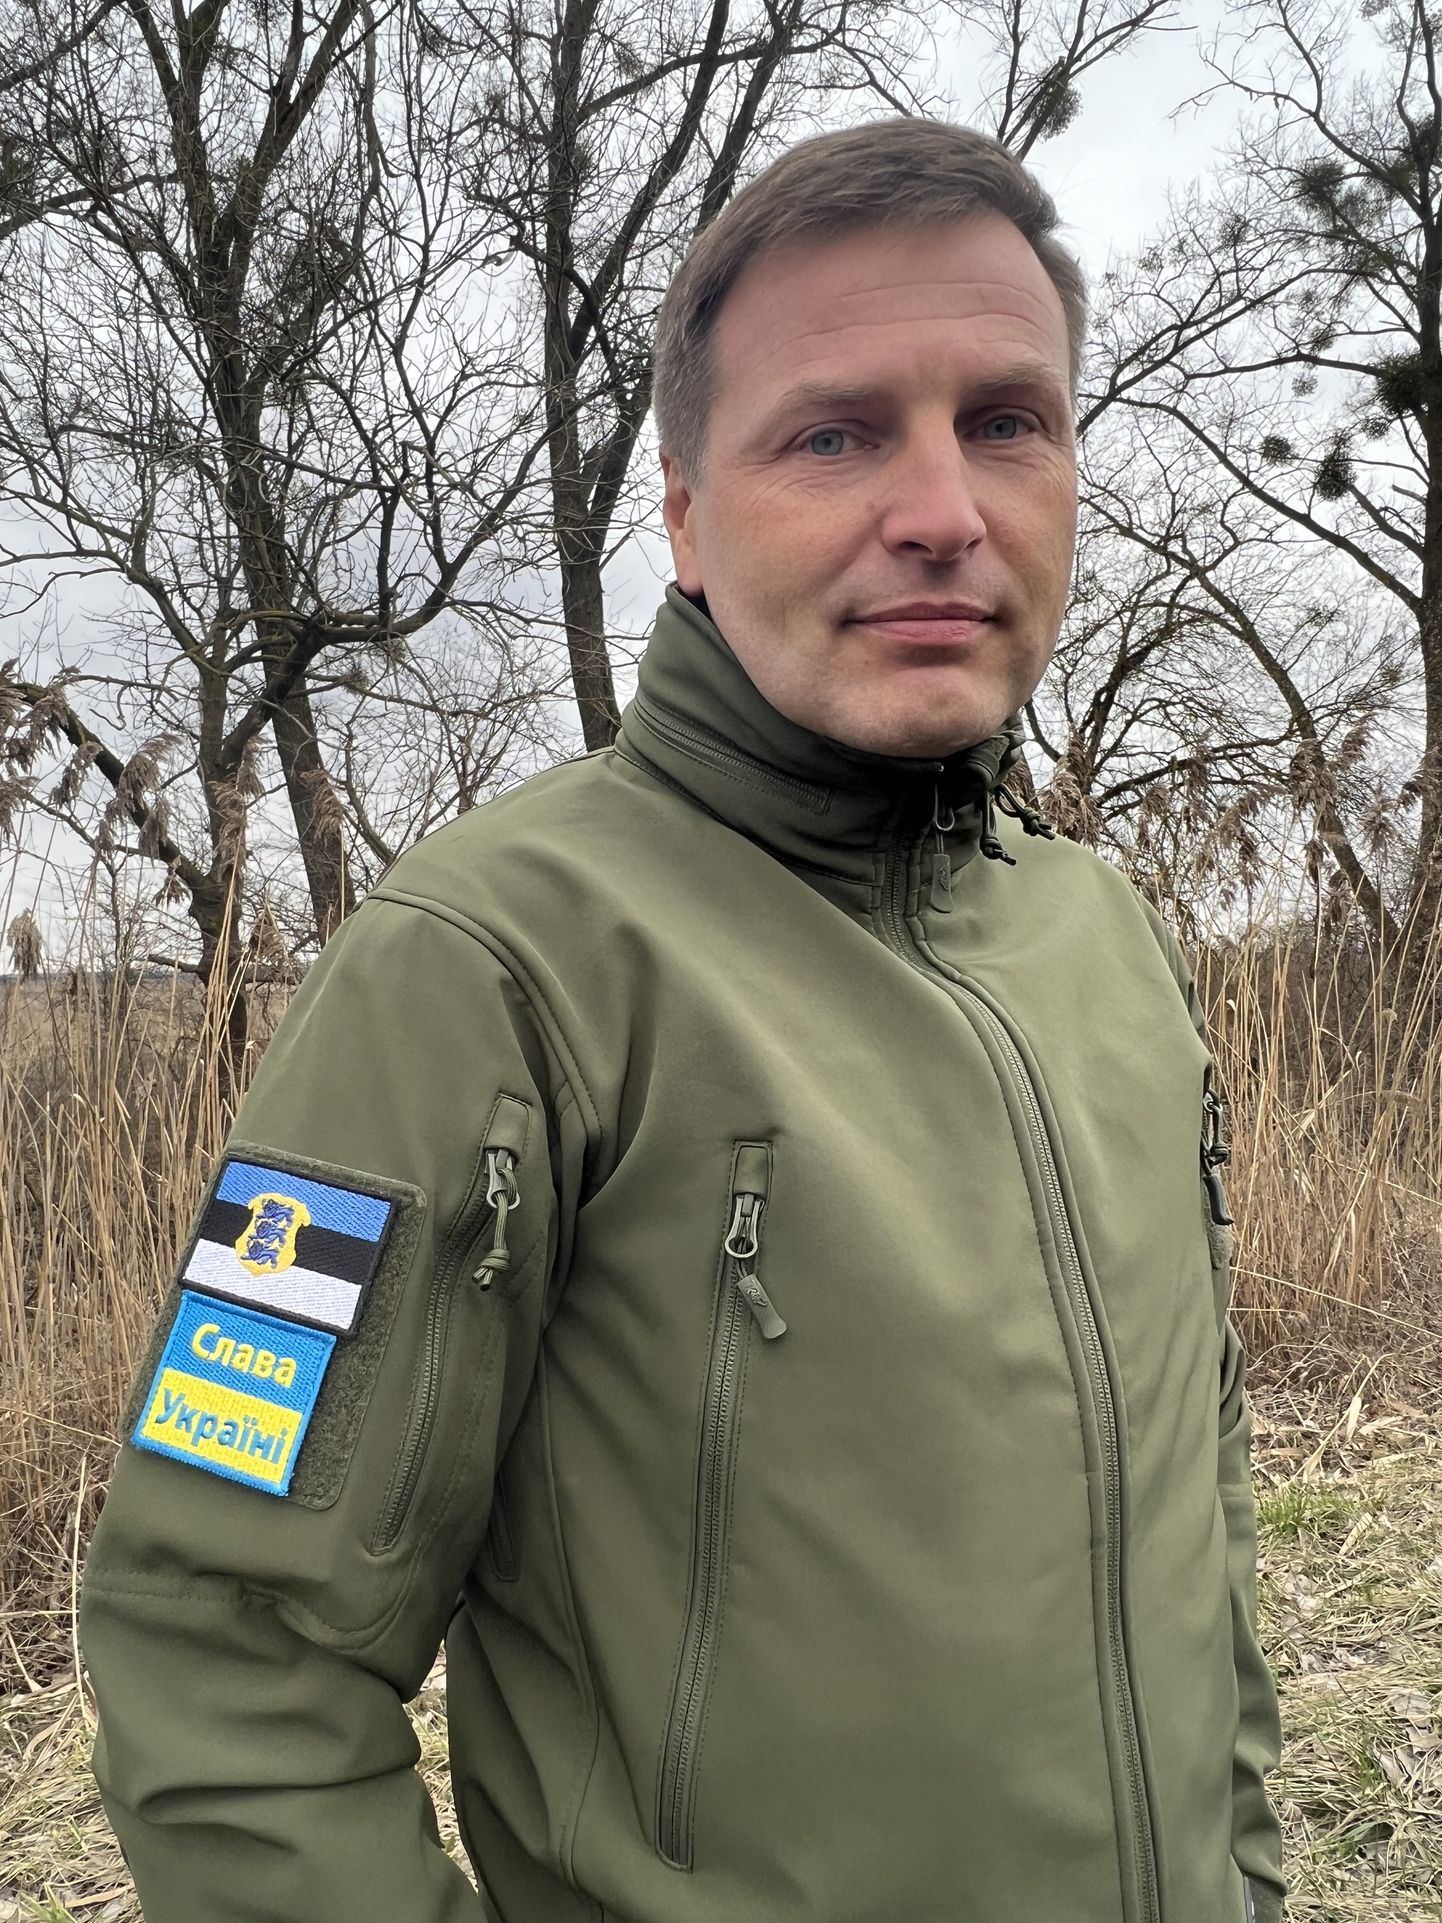 Estonian Defense Minister Hanno Pevkur in Ukraine on March 20 during a stopover on his way to Kyiv, where he was scheduled to meet with his Ukrainian counterpart and take part in a security forum on the following day.